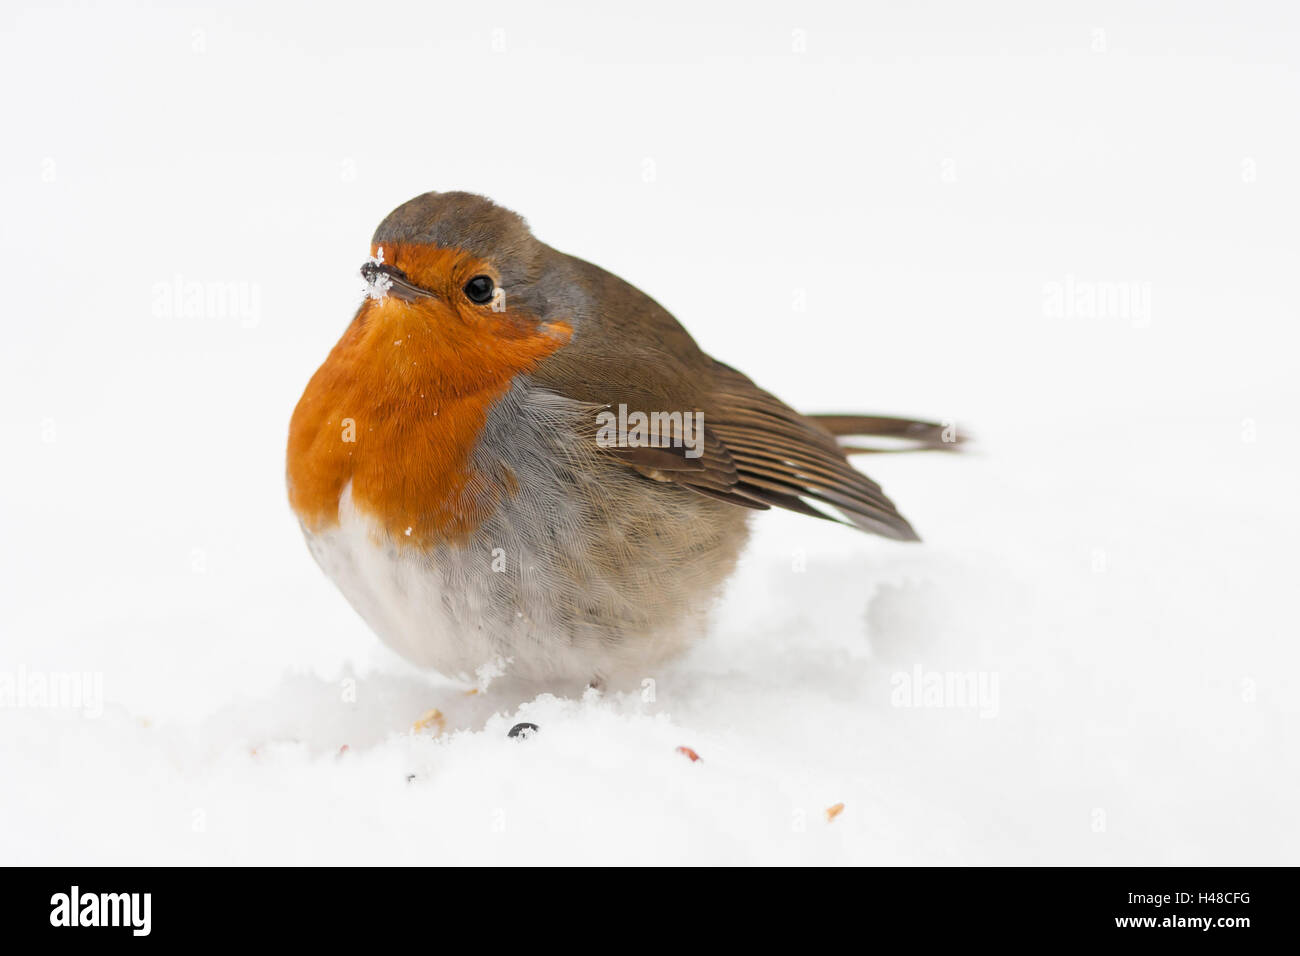 robin in snow with fluffed up feathers Stock Photo